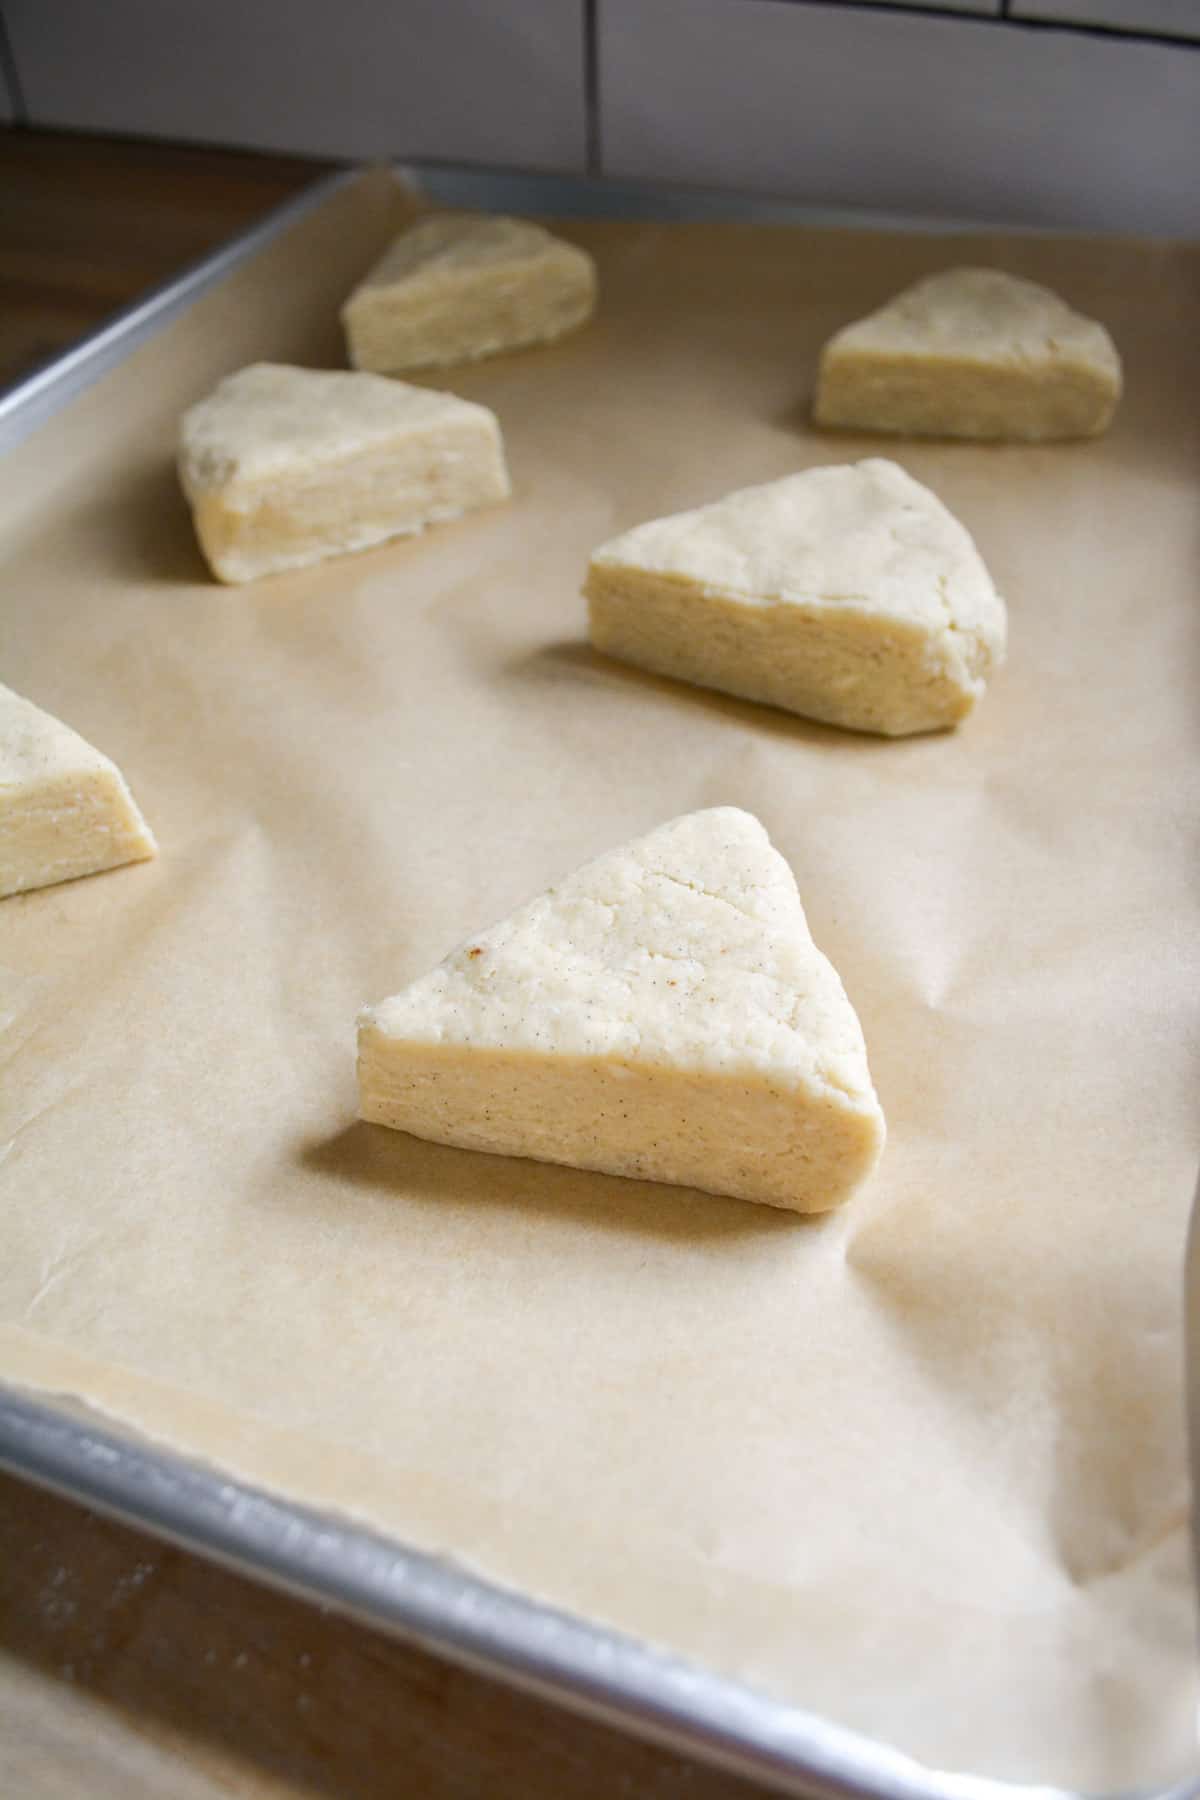 Vegan scone dough placed onto a parchment lined baking sheet.